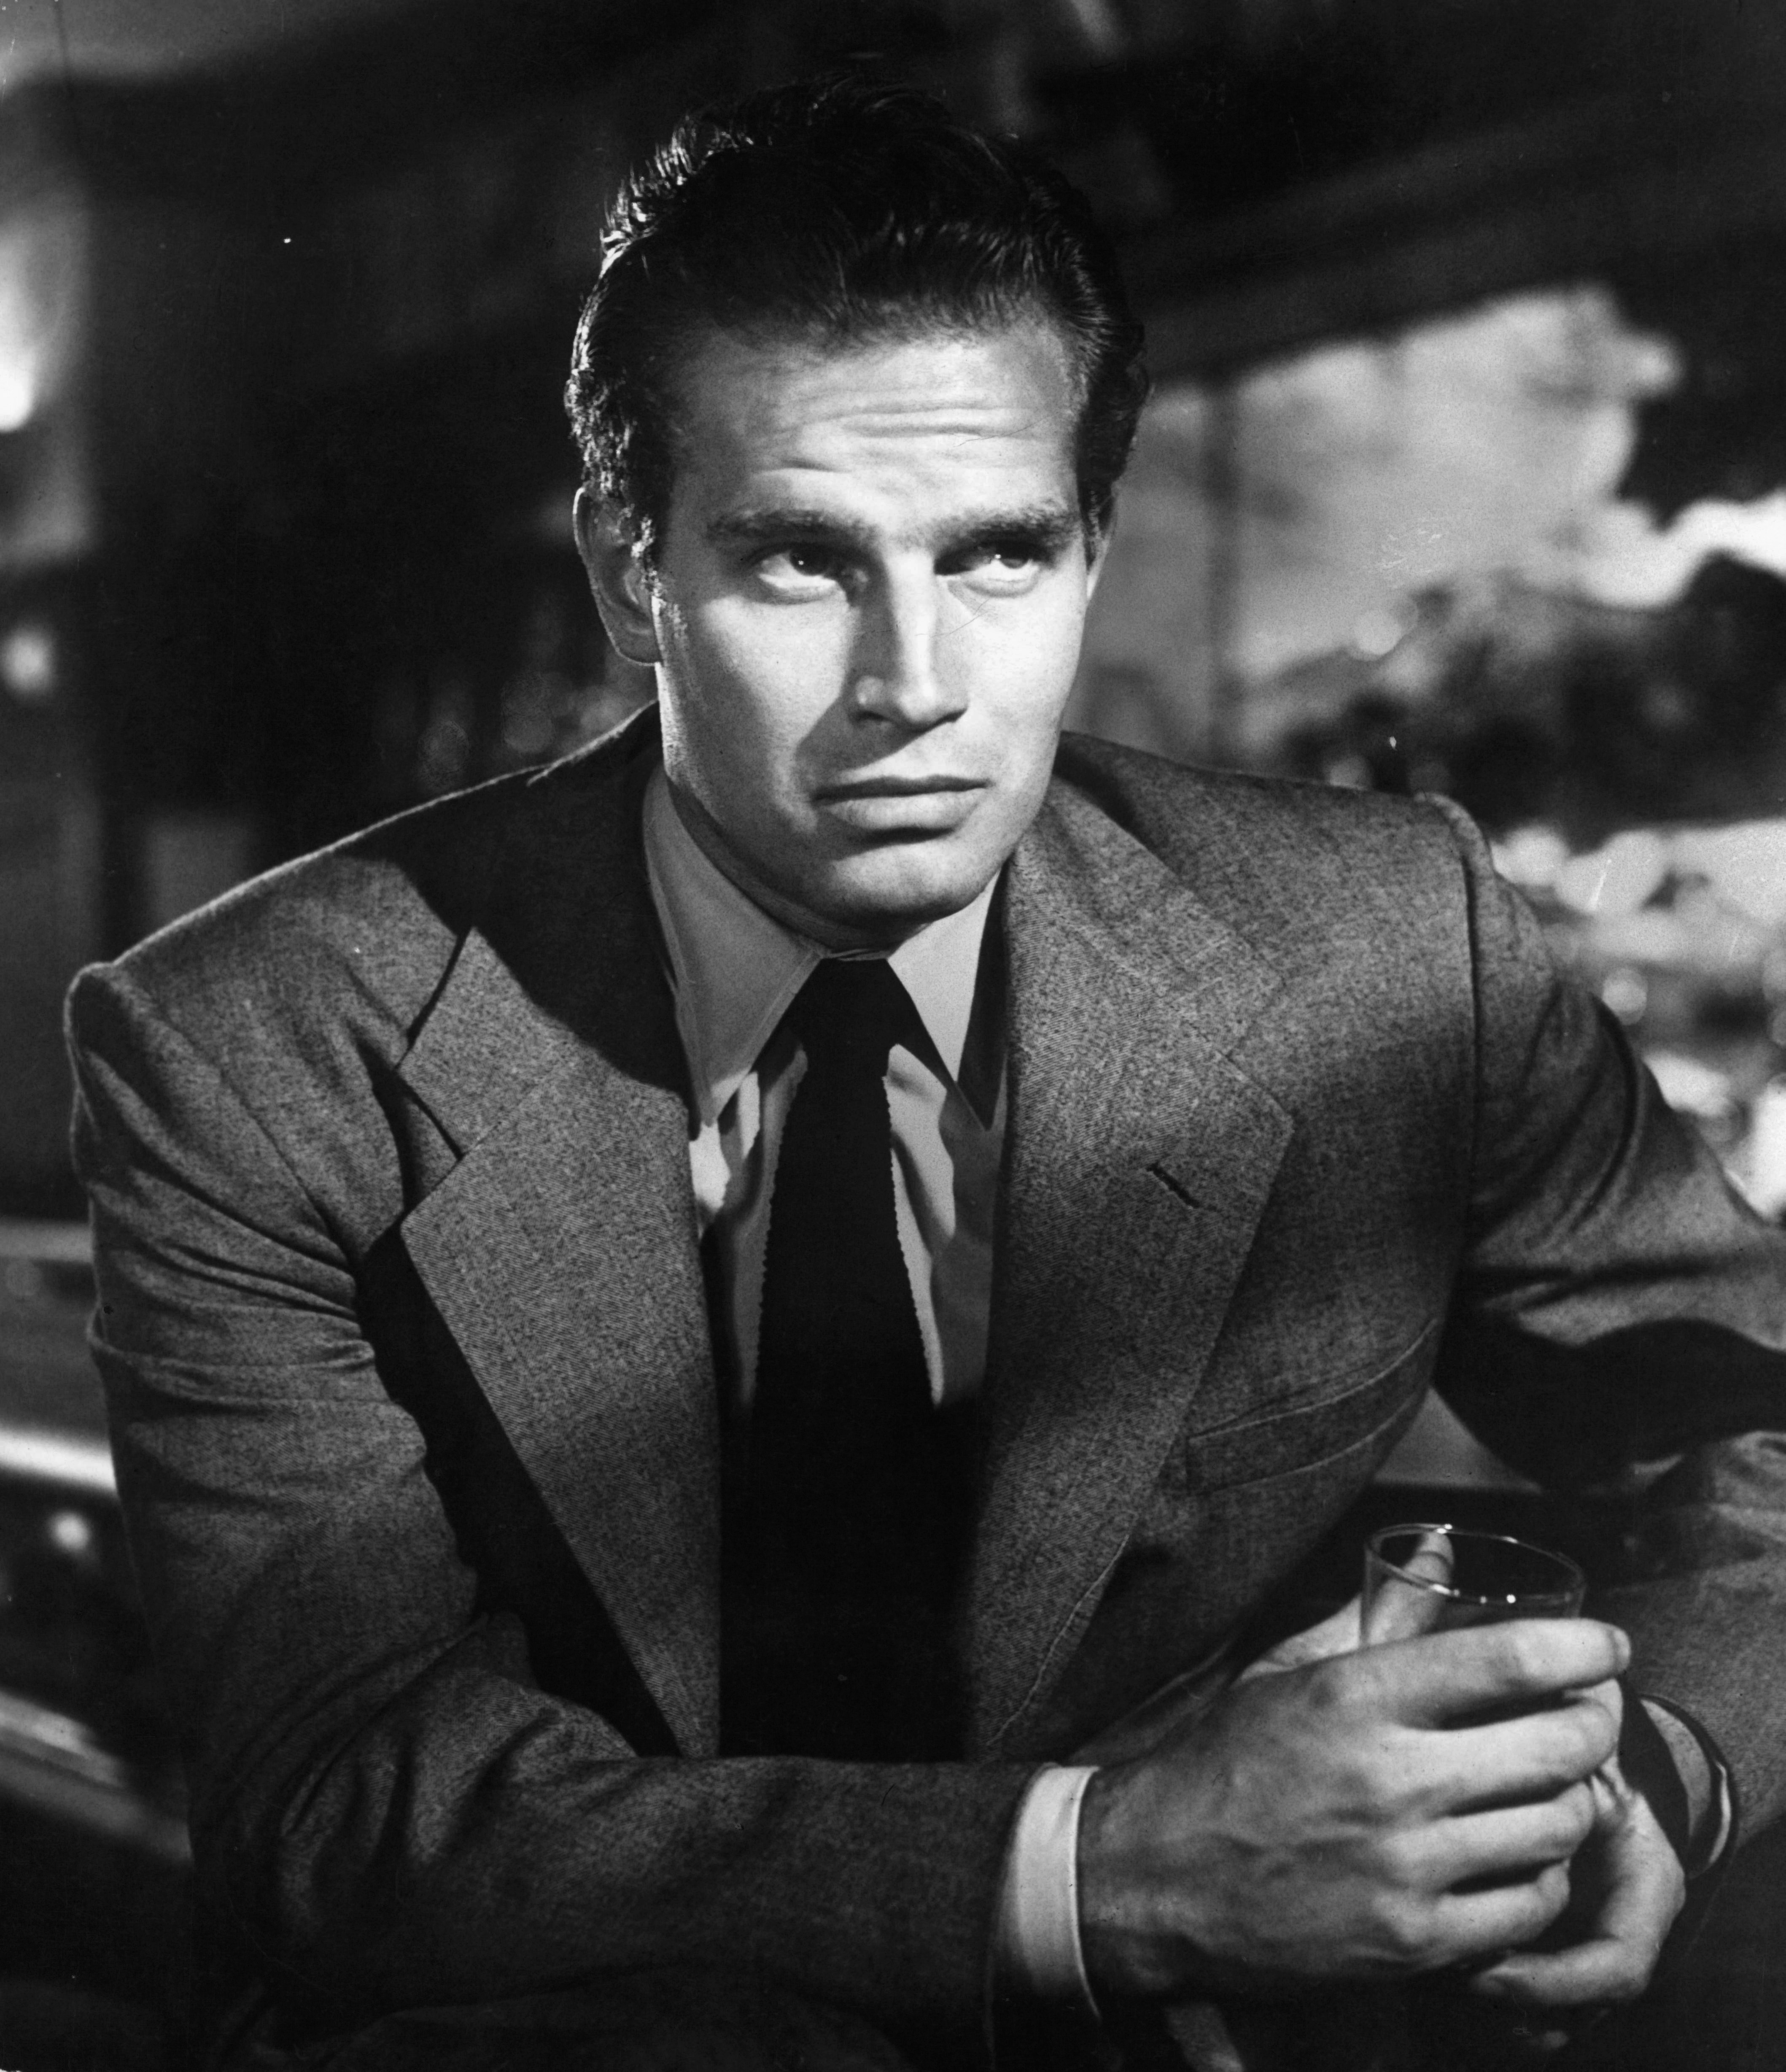 A photo of Charlton Heston holding a drink in a scene from the film 'Dark City', 1950 | Photo: Getty Images